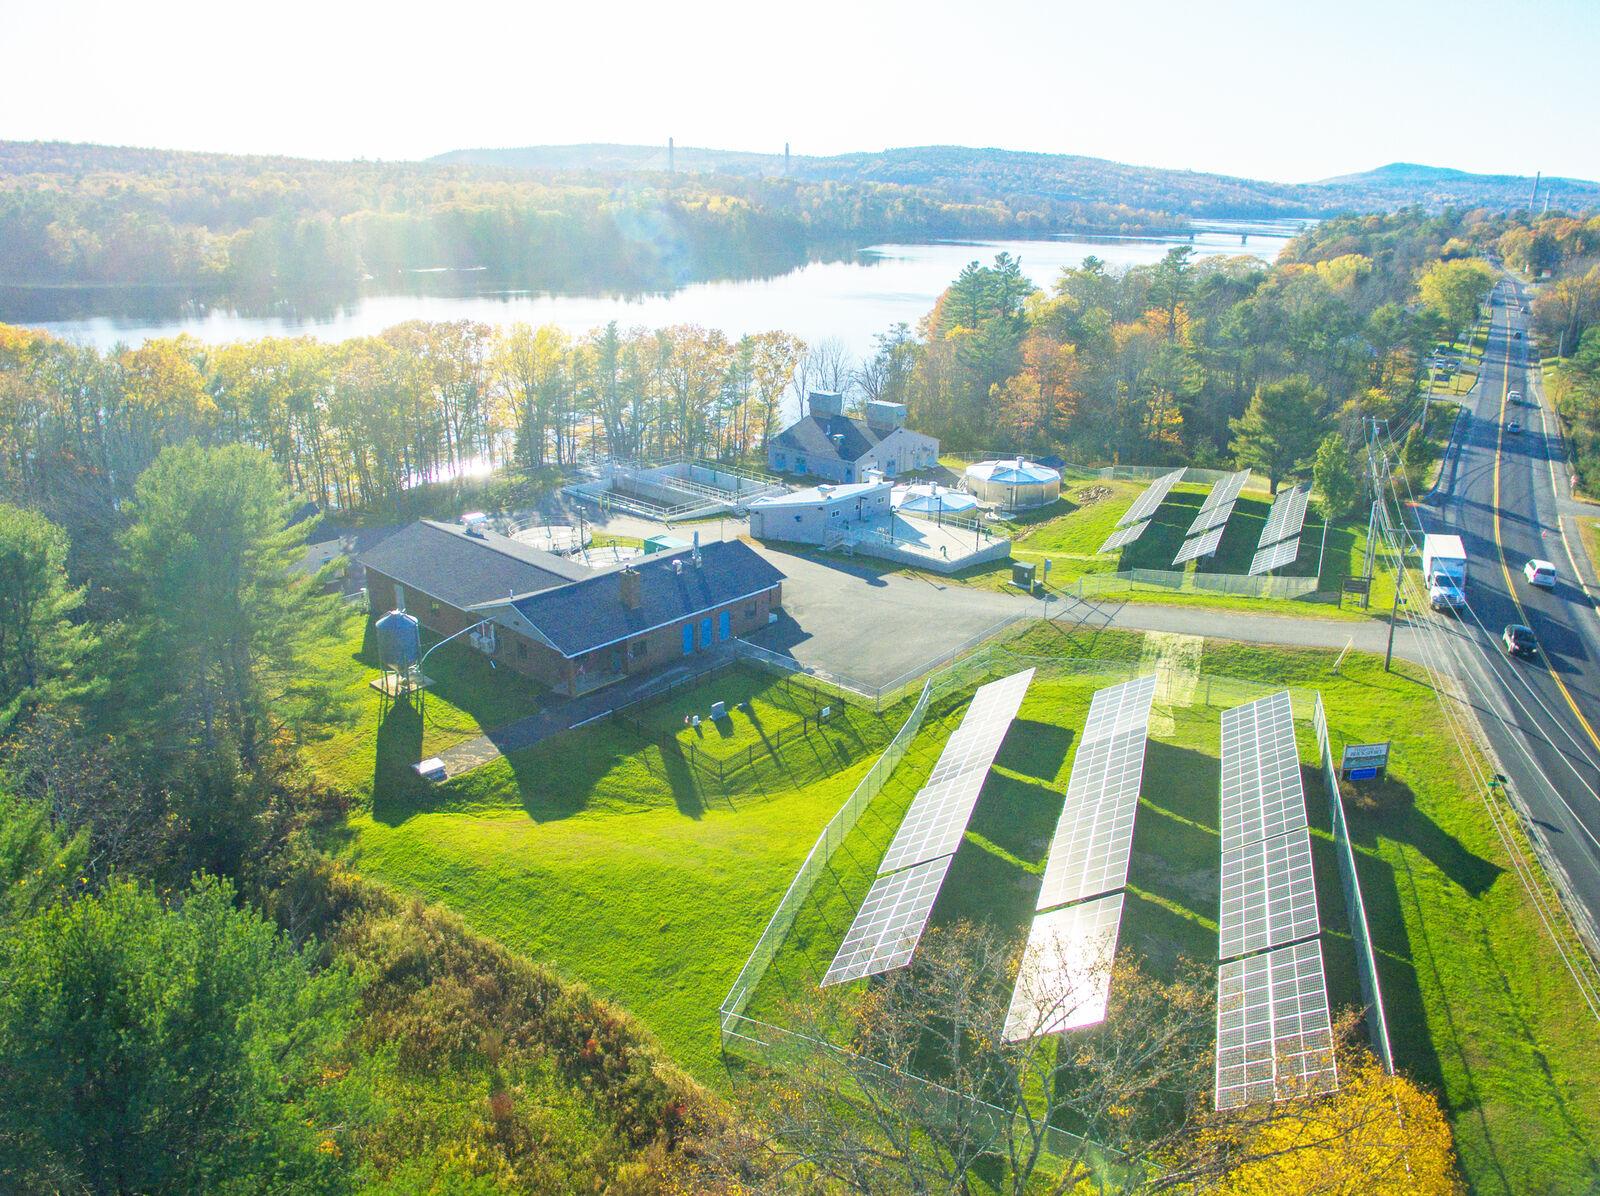 Bucksport Completes Second Municipal Solar Project with Help of Solar Impact Fund